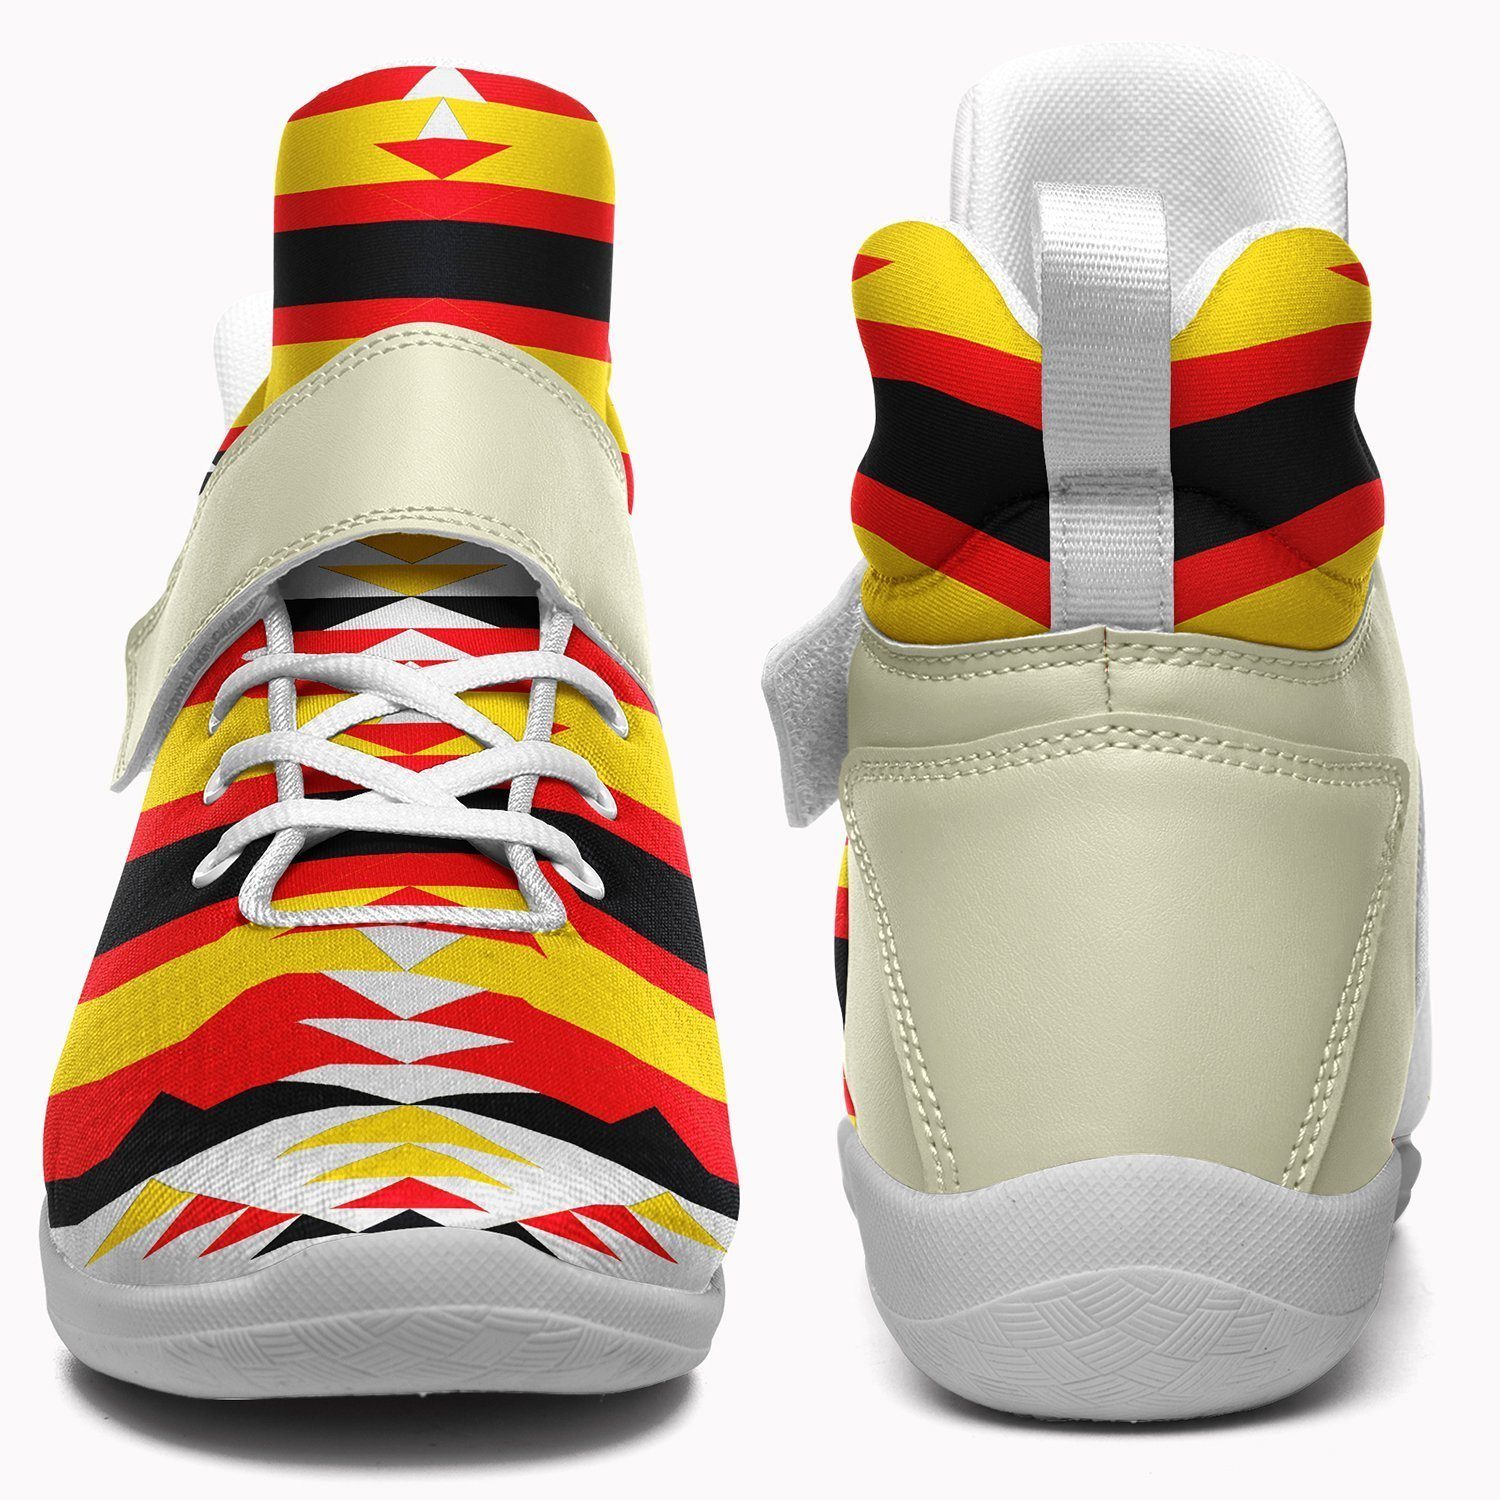 Visions of Peace Directions Ipottaa Basketball / Sport High Top Shoes - White Sole 49 Dzine 